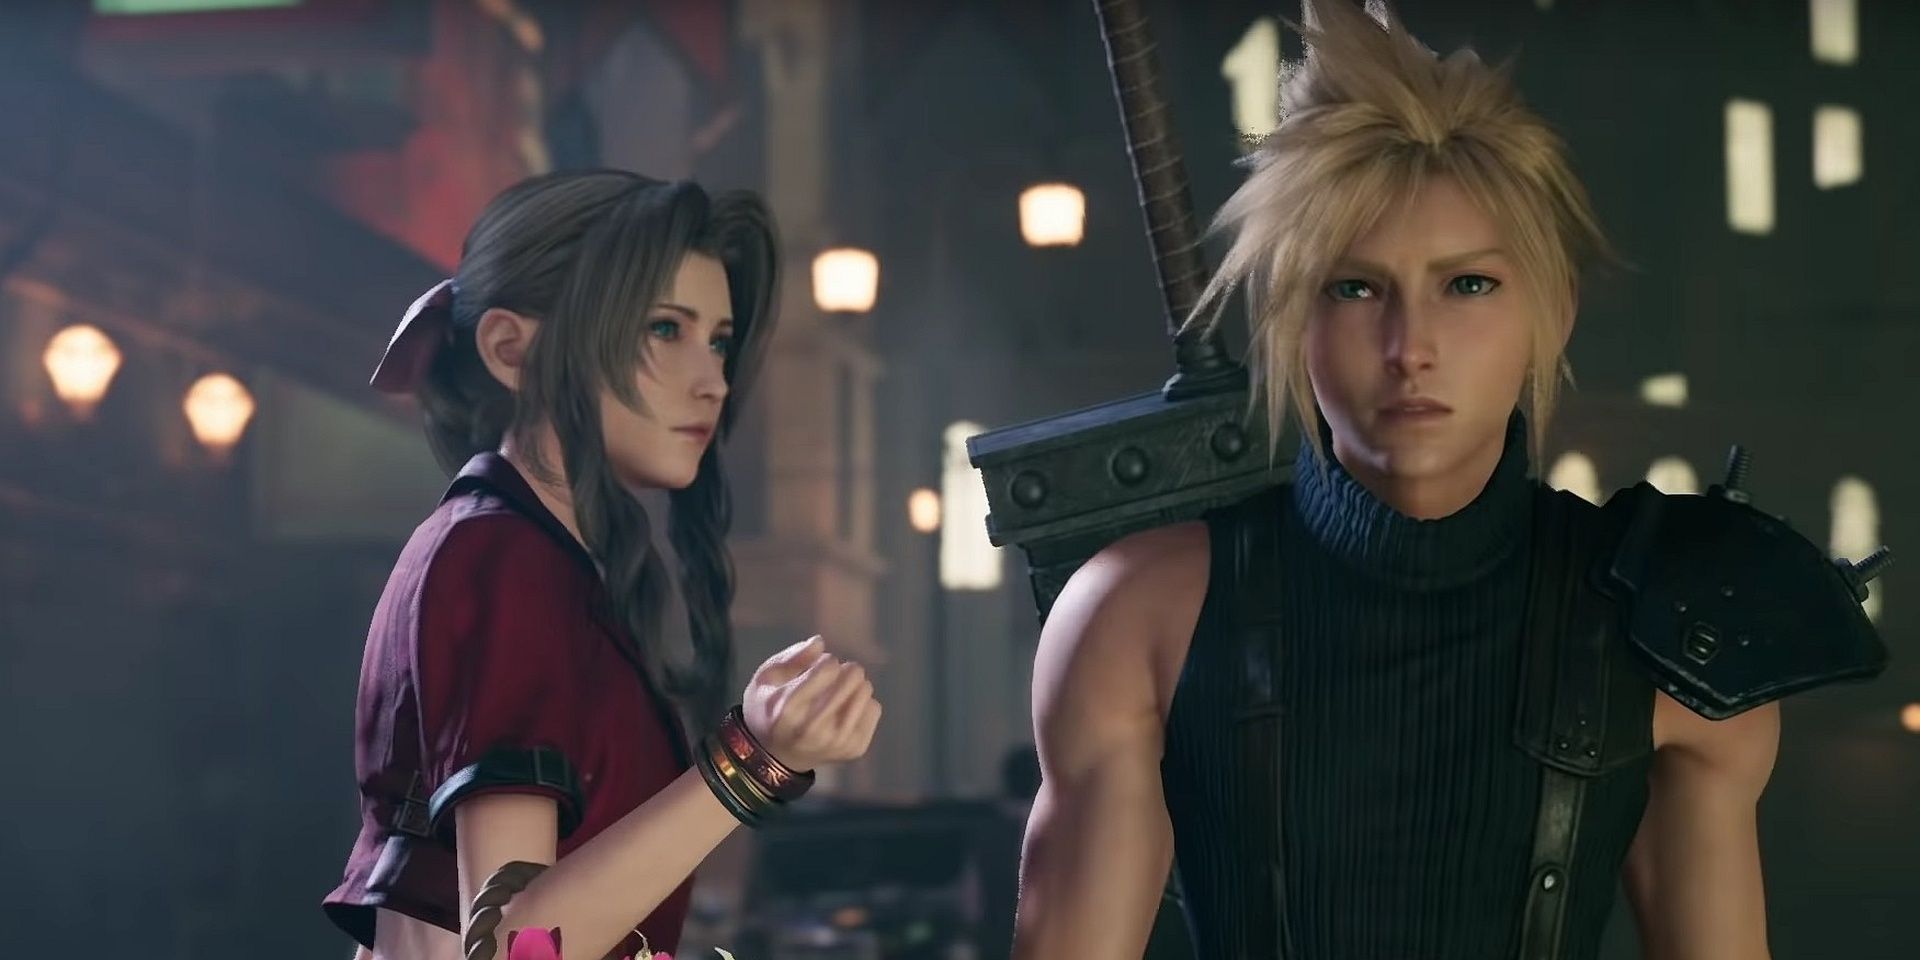 A screenshot showing Aerith Gainsborough and Cloud Strife in Final Fantasy 7 Remake